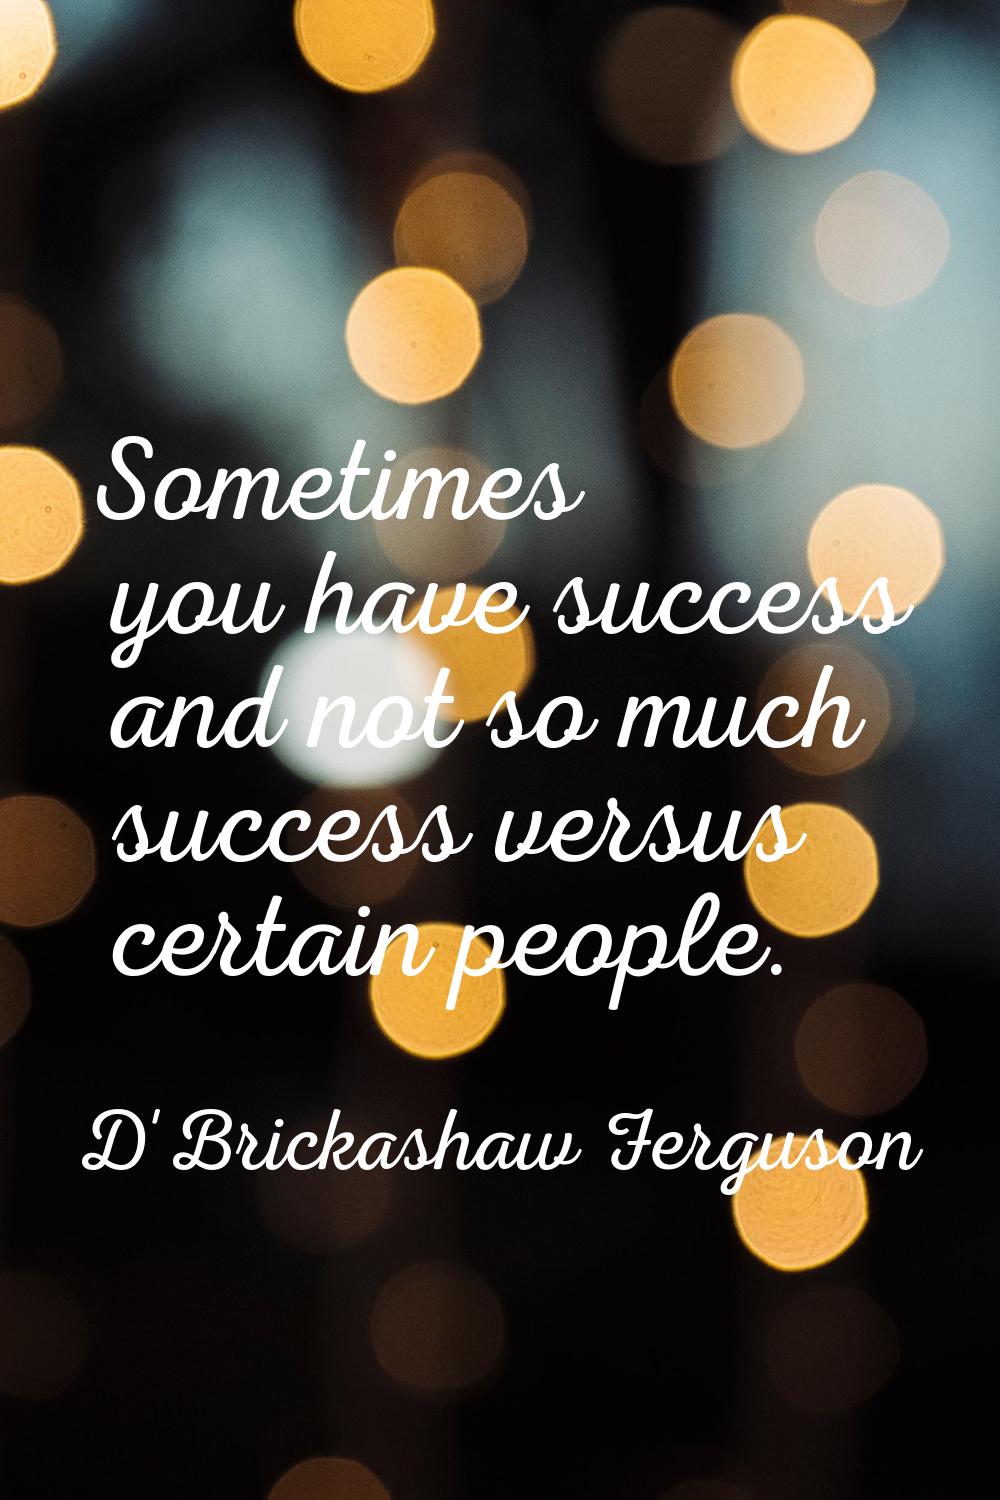 Sometimes you have success and not so much success versus certain people.